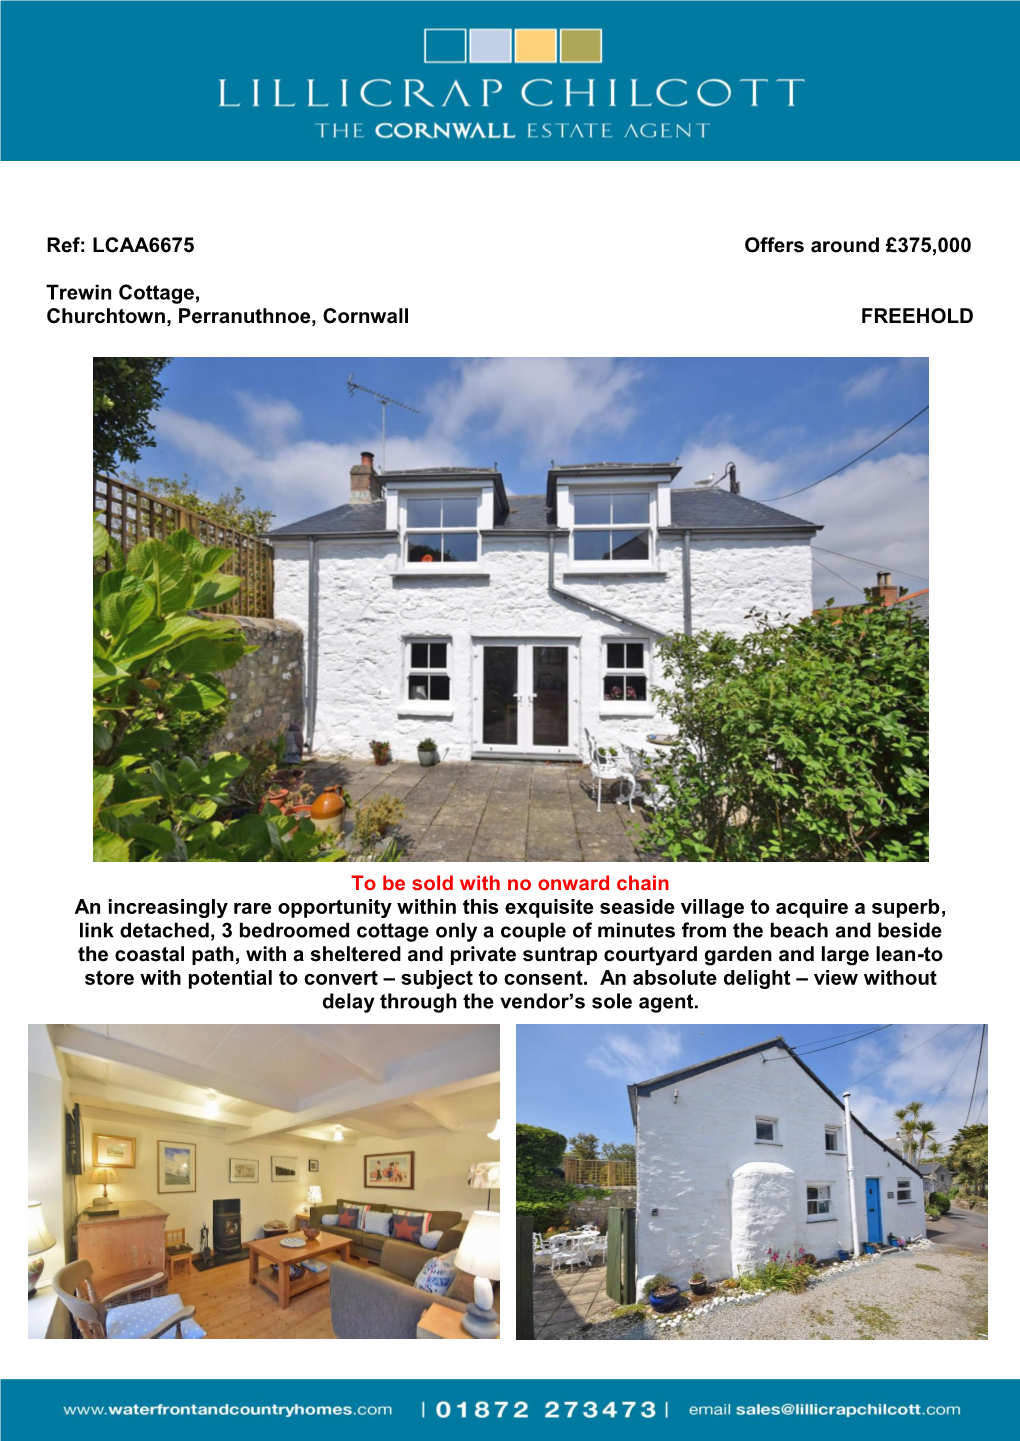 Ref: LCAA6675 Offers Around £375000 Trewin Cottage